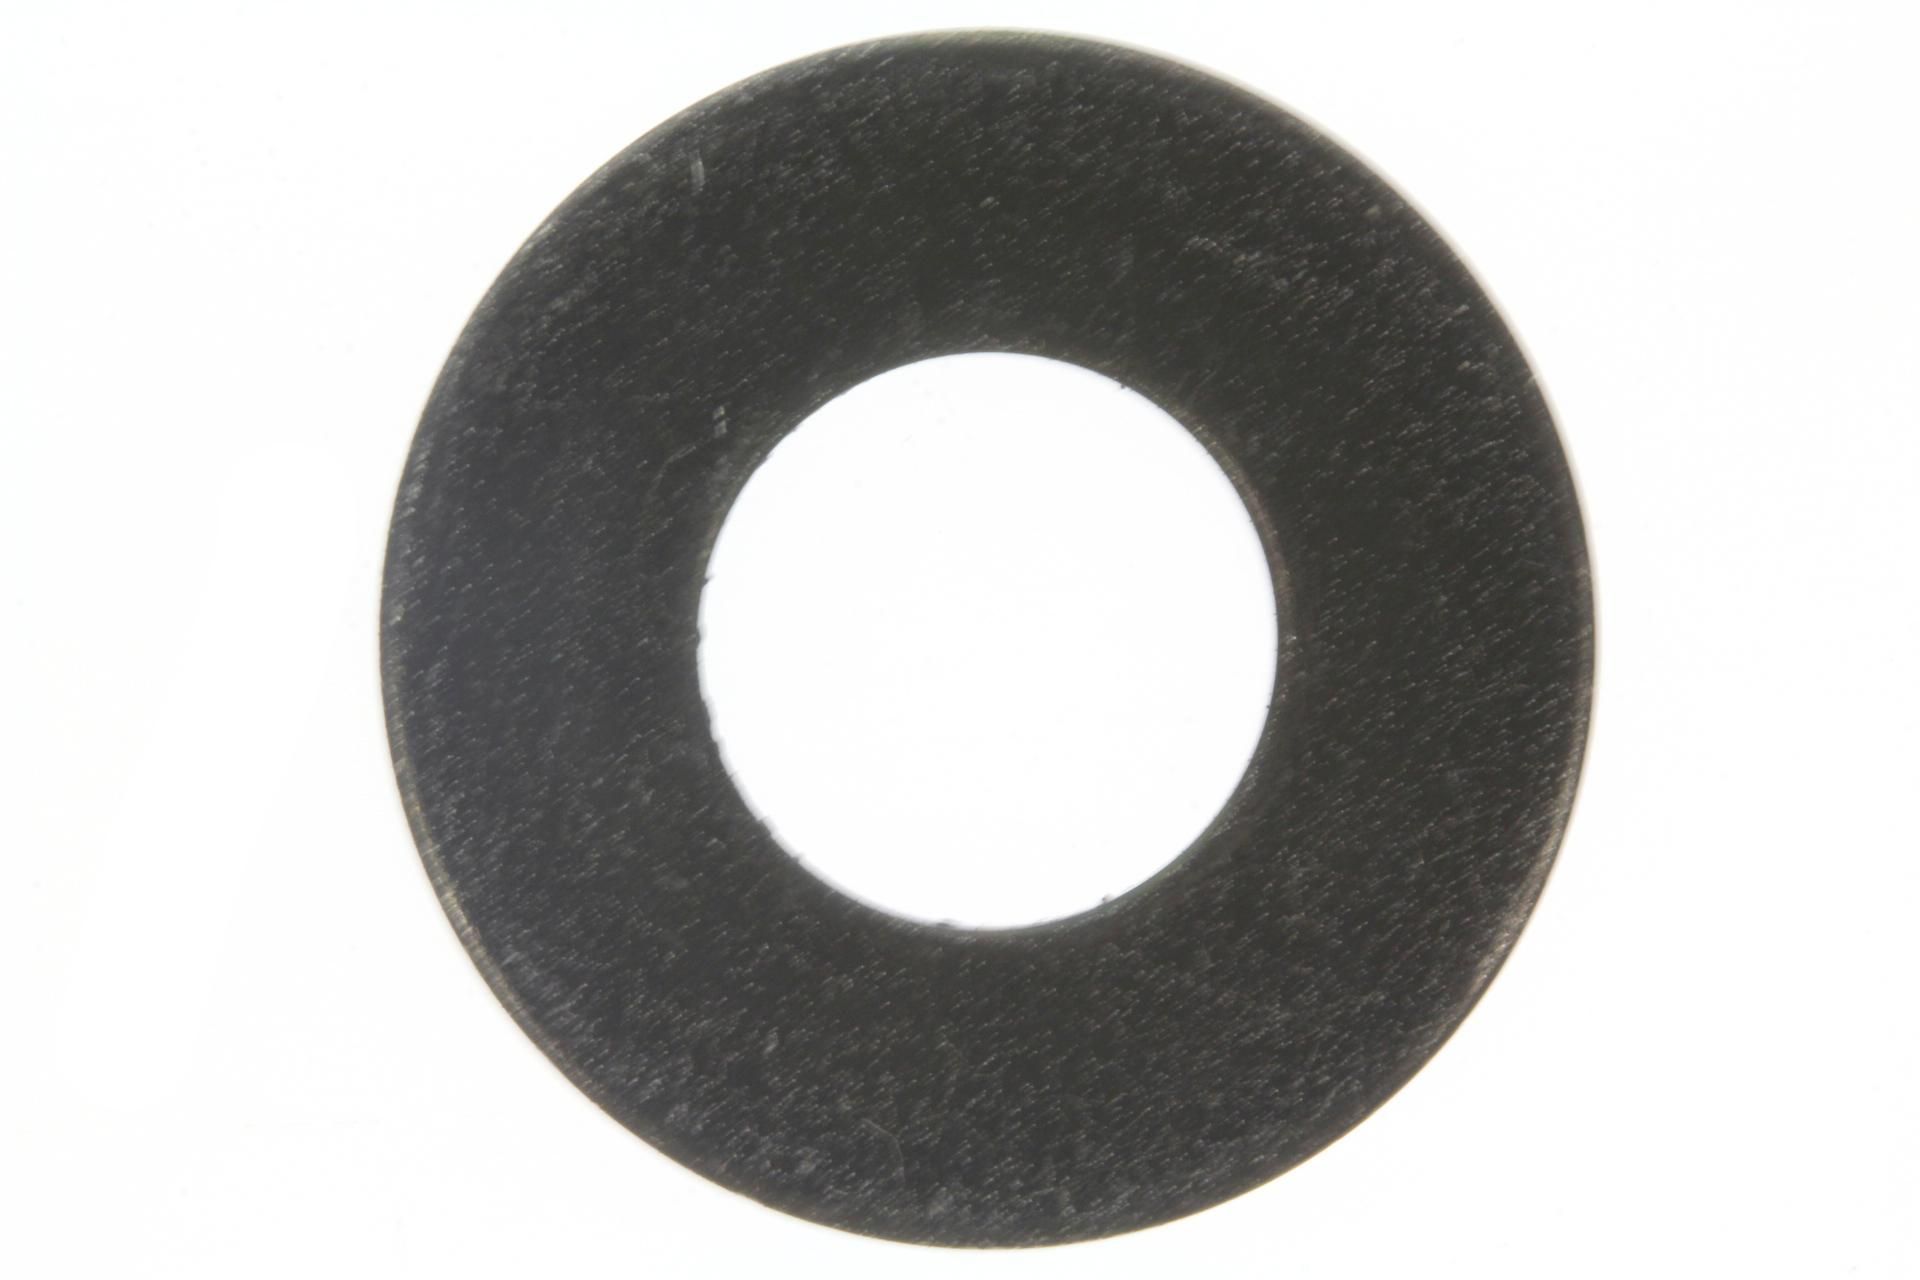 90432-HA2-000 WASHER, SPECIAL (10MM)